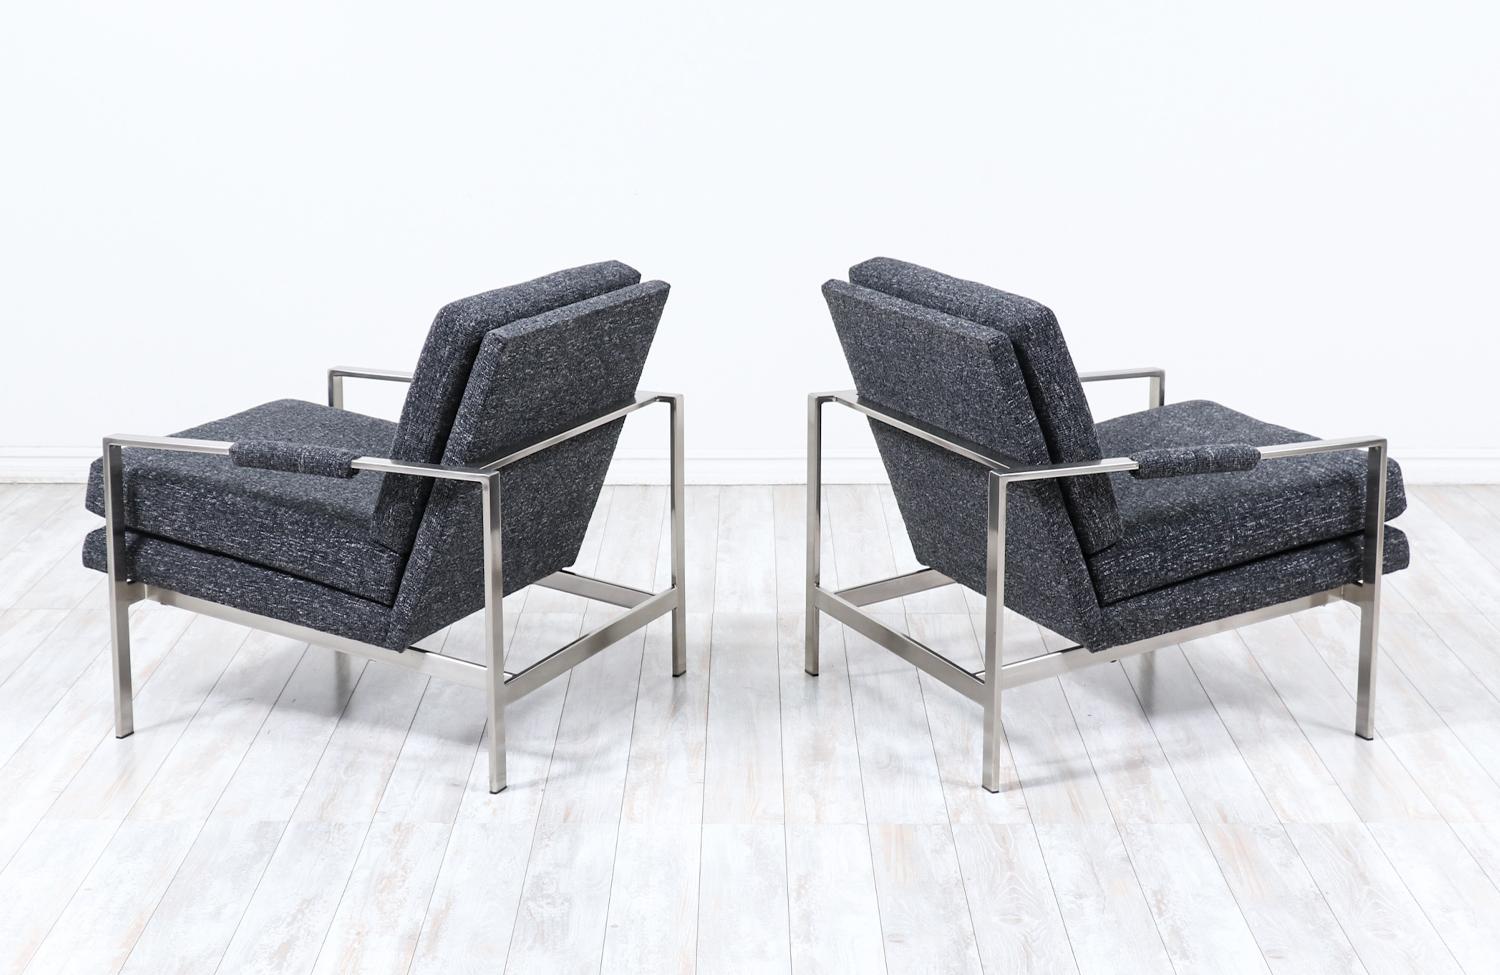 American  Expertly Restored - Milo Baughman Steel Lounge Chairs for Thayer Coggin